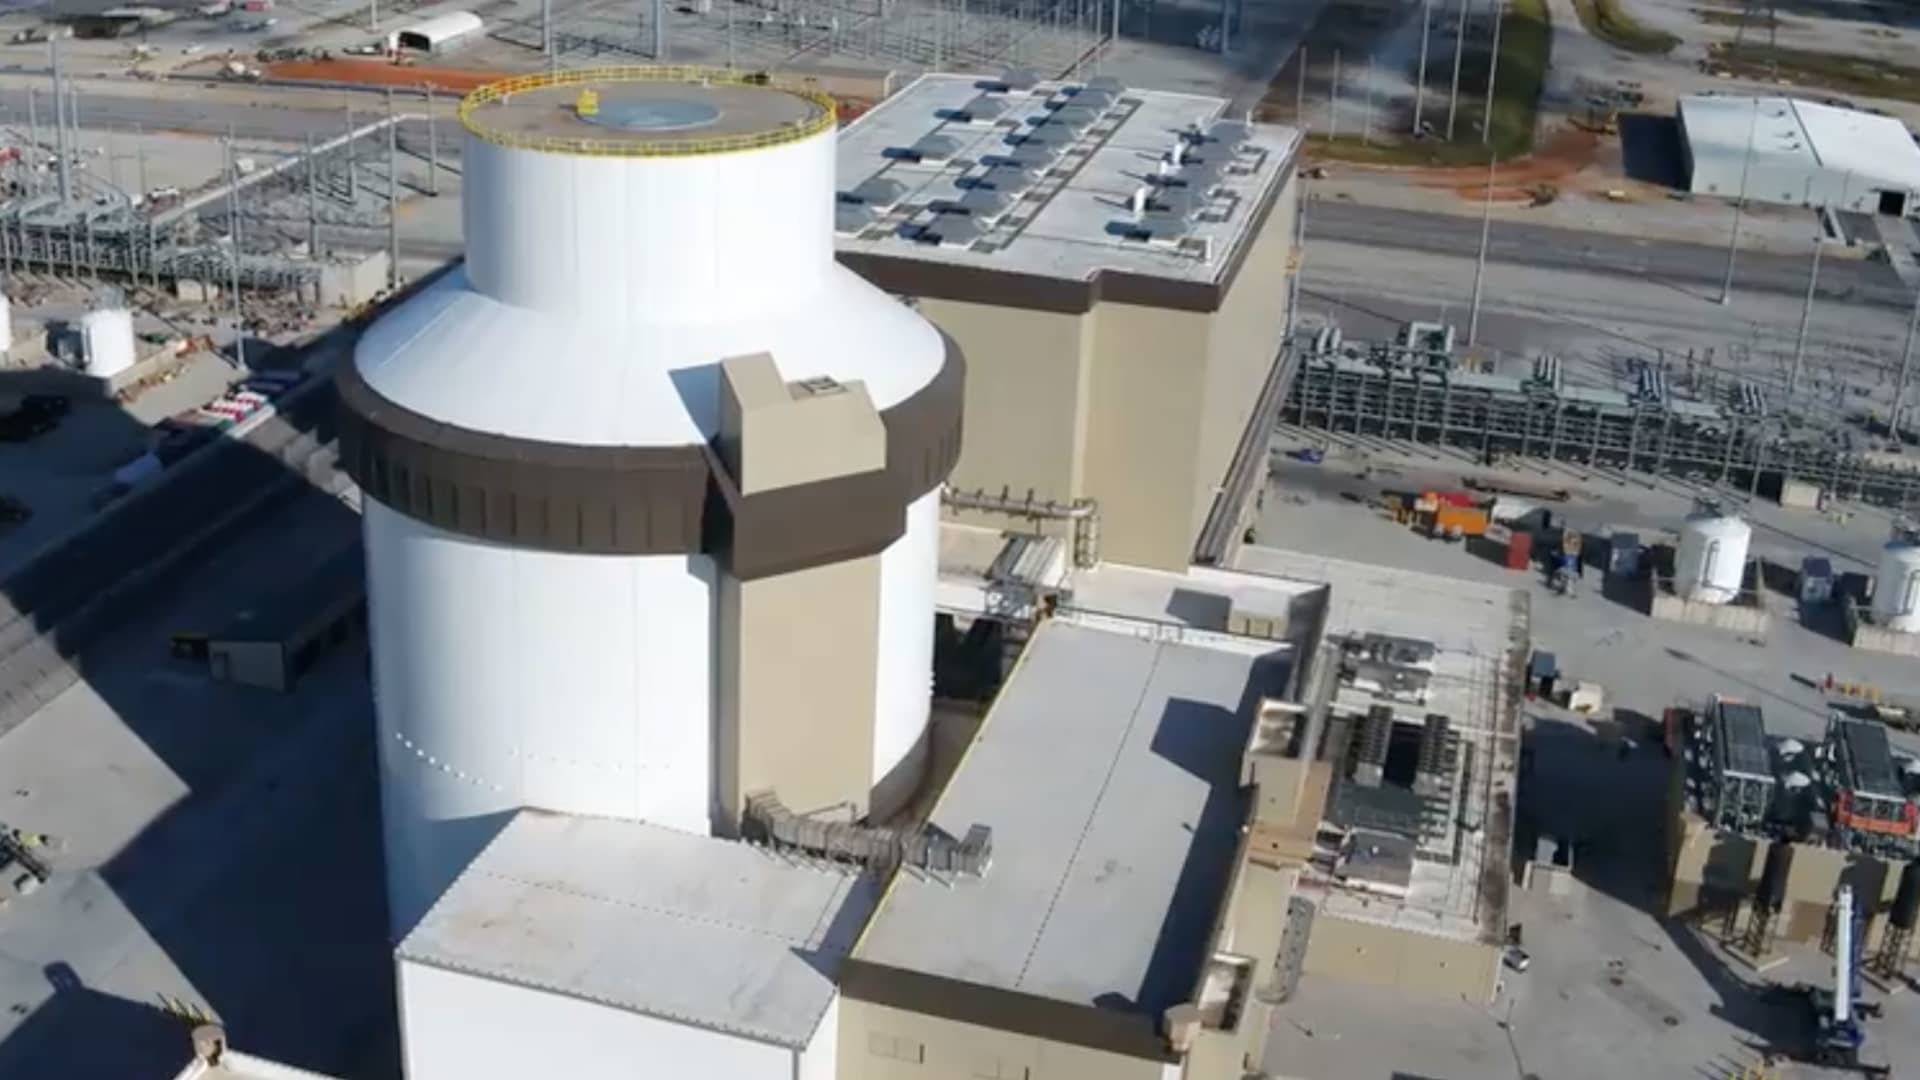 A new nuclear reactor in the U.S. starts up. It's the first in nearly seven years